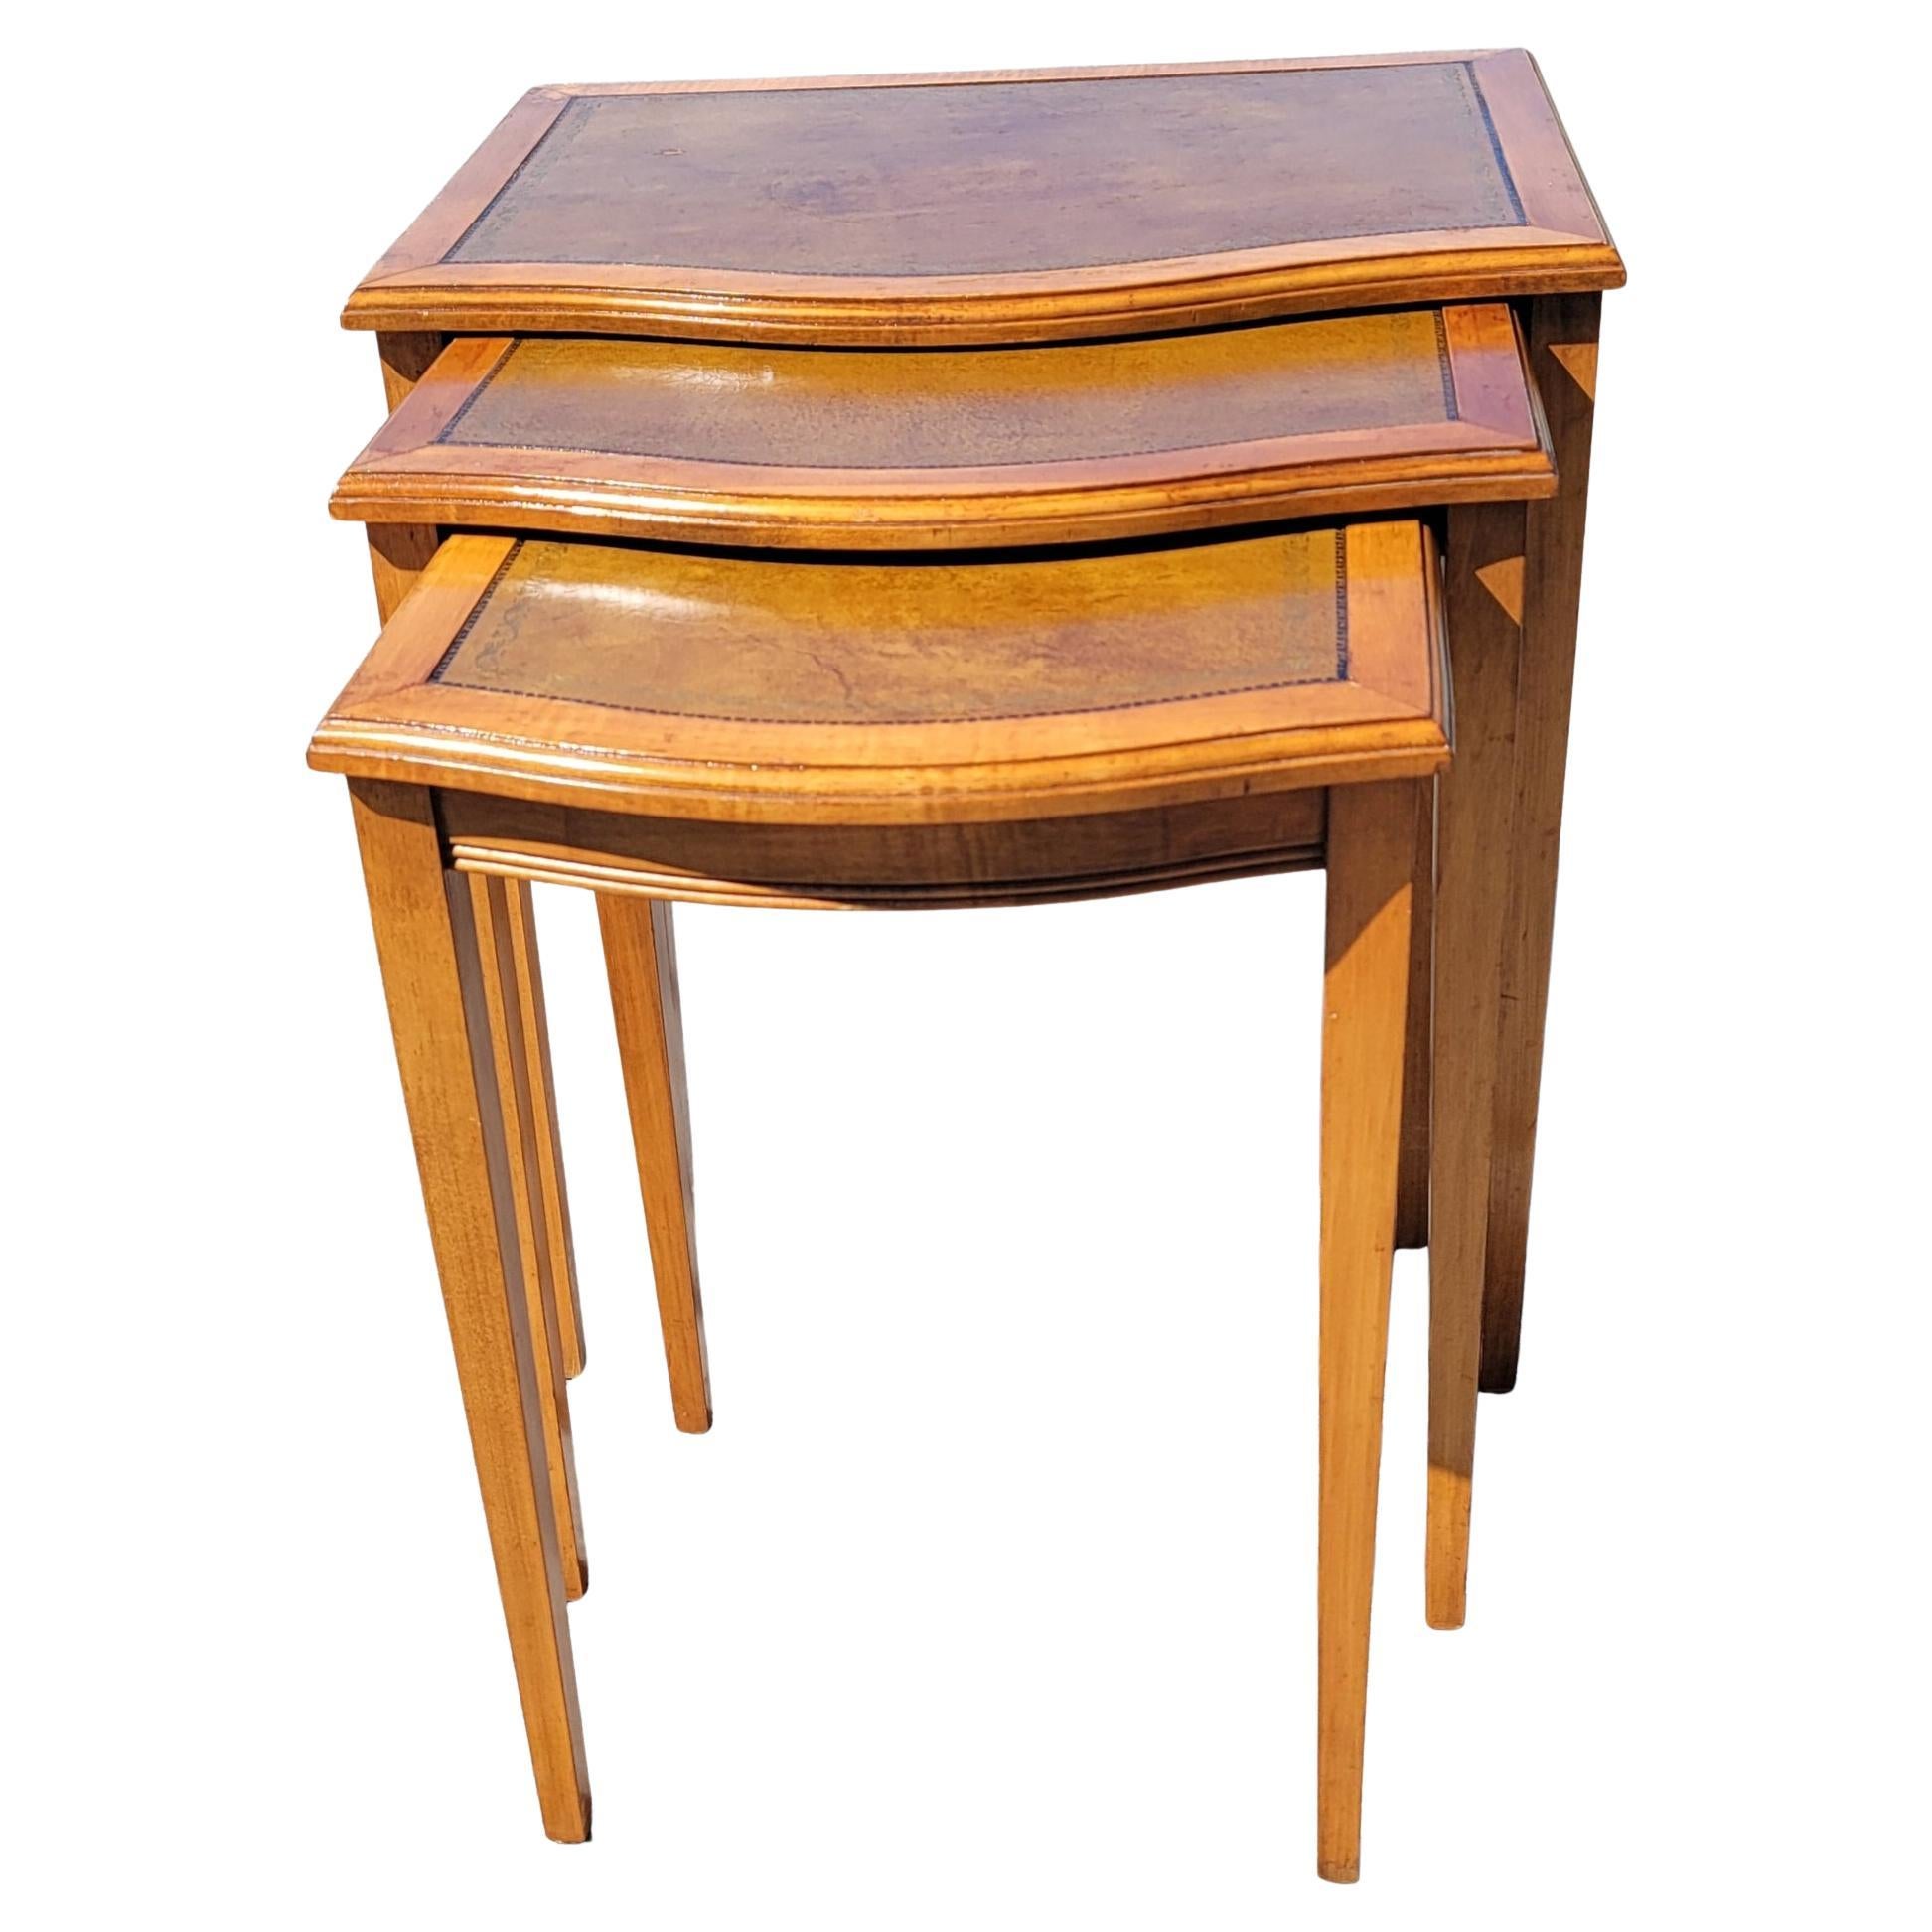 Set of 3 Mid-Century Modern fruitwood nesting tables with leather and stenciled top. 
Larger table measures 22